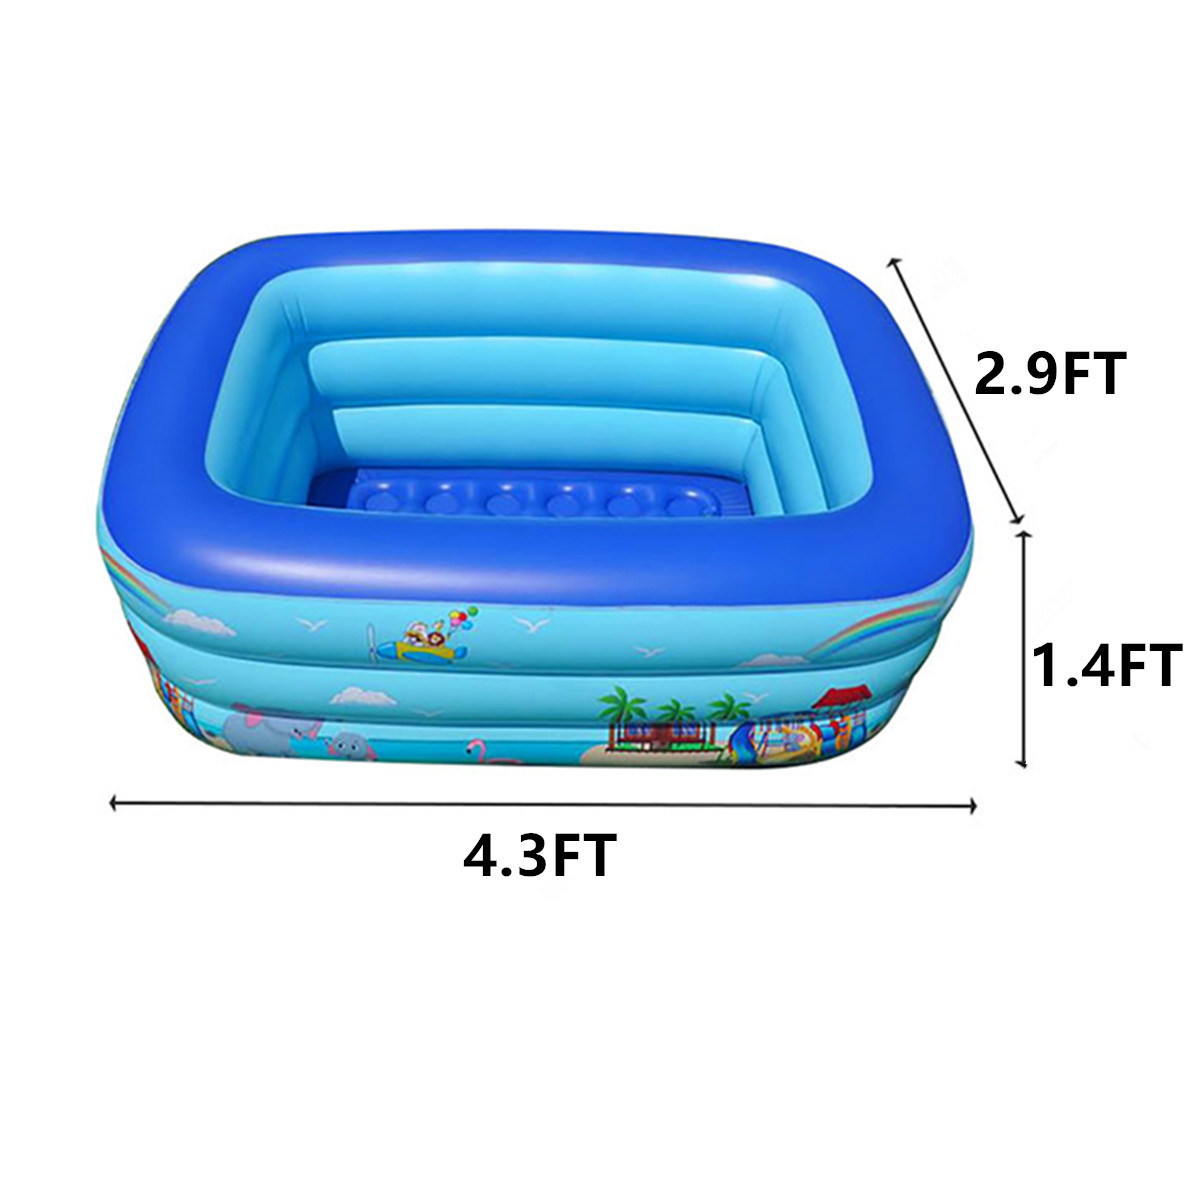 Thickened-PVC-Inflatable-Swimming-Pool-Childrens-Swimming-Pool-Bath-Tub-Outdoor-Indoor-Play-Pool-Chi-1856509-12